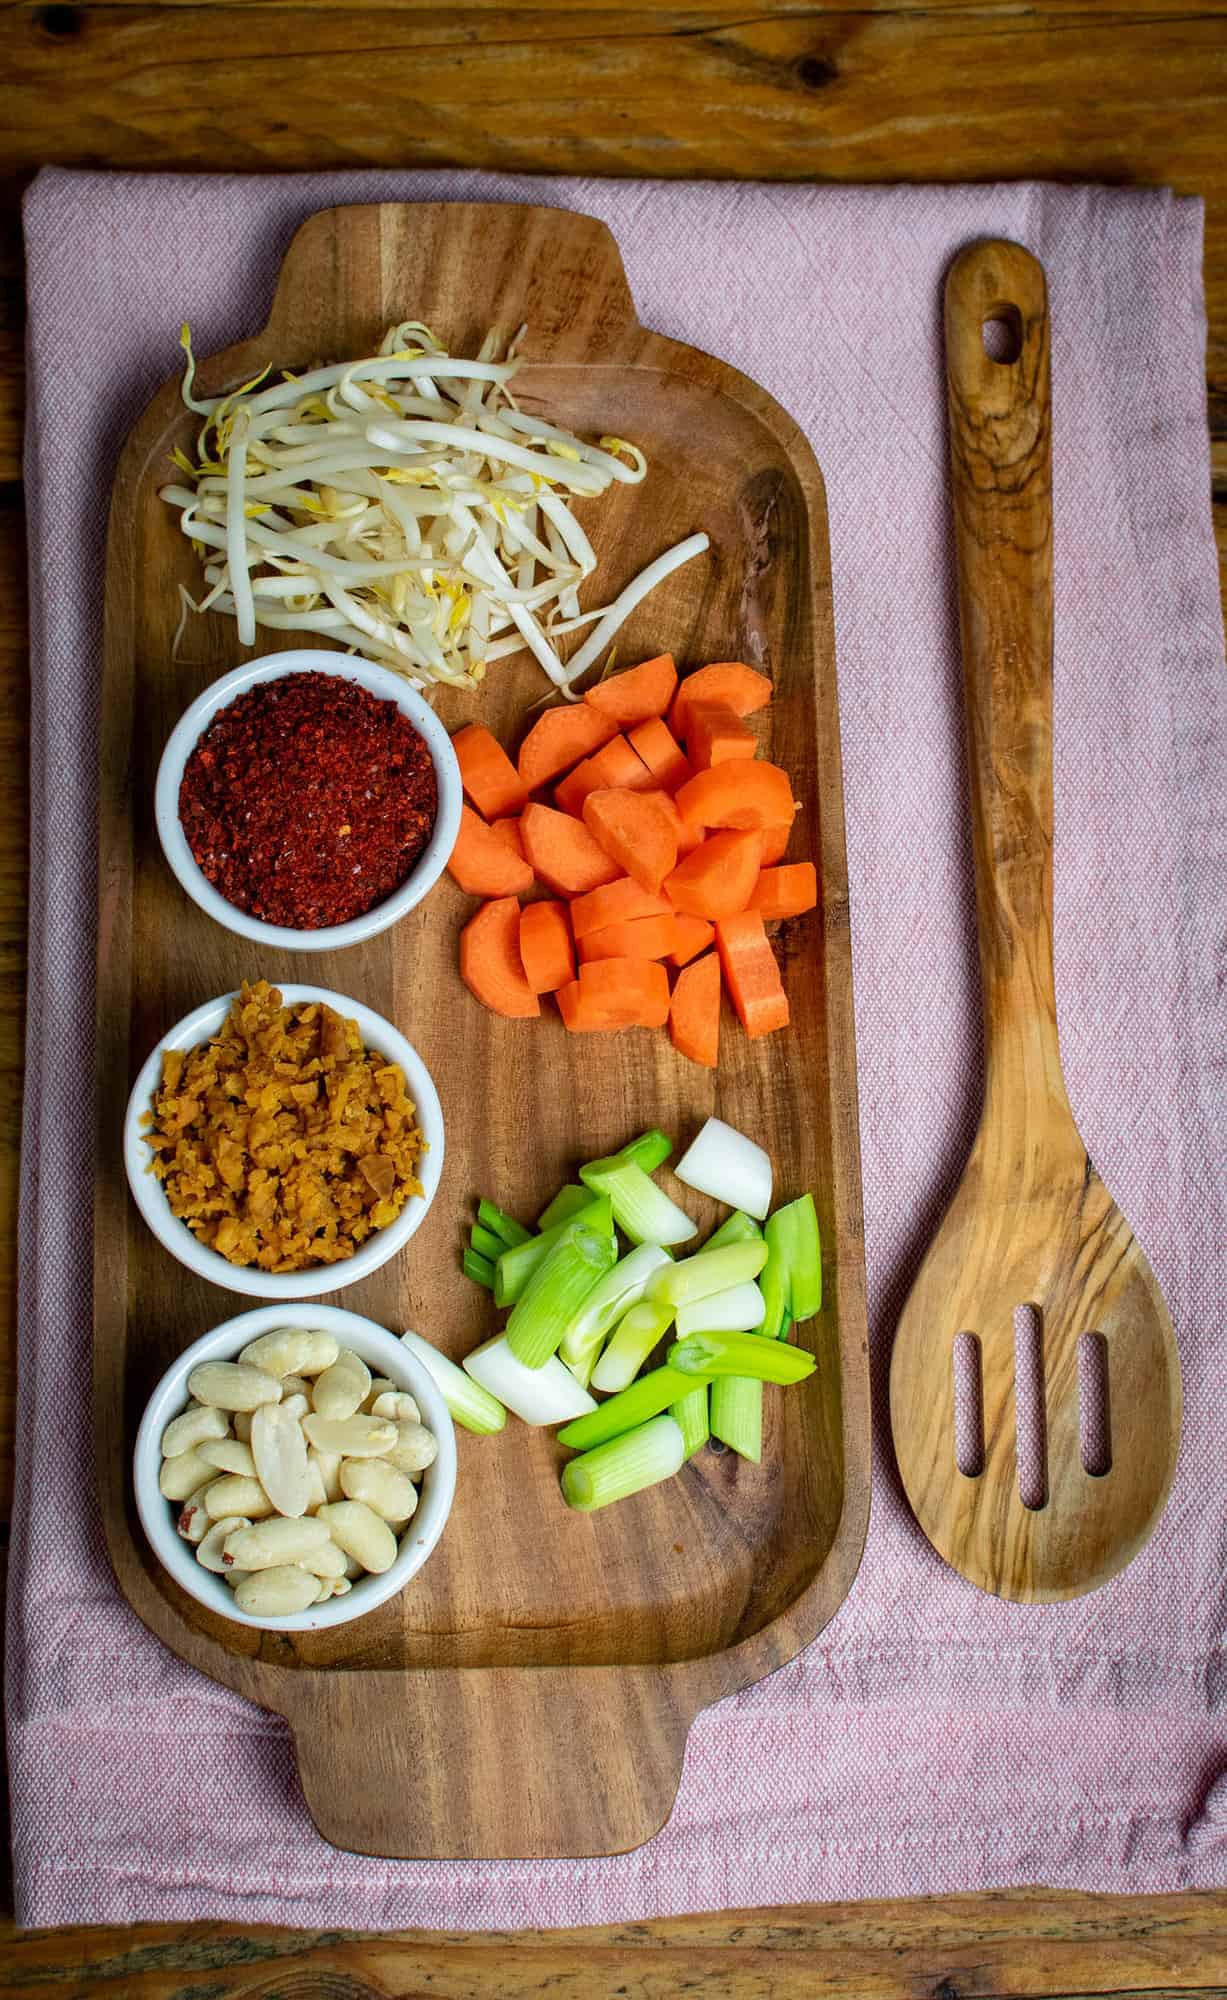 Pad Thai ingredients, chopped and prepared in small bowls, all sitting on a wooden serving board